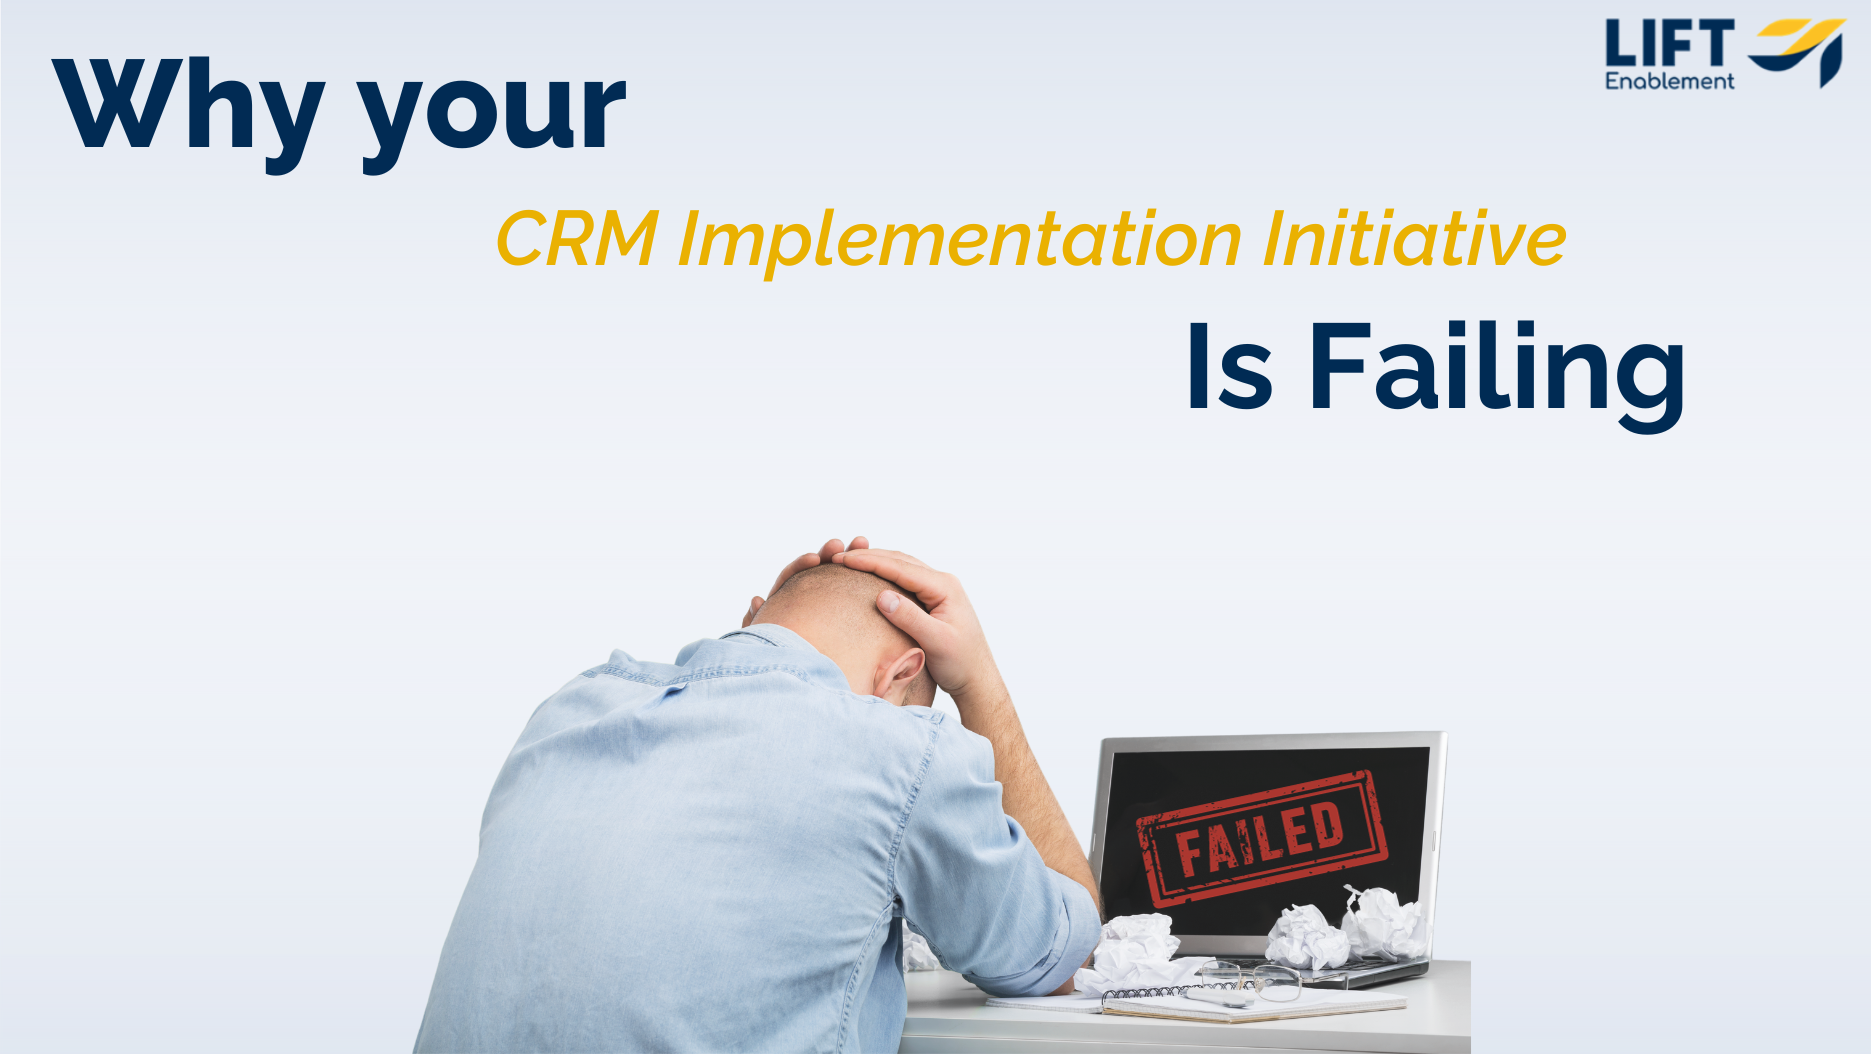 why-your-crm-implementation-is-failing-cta